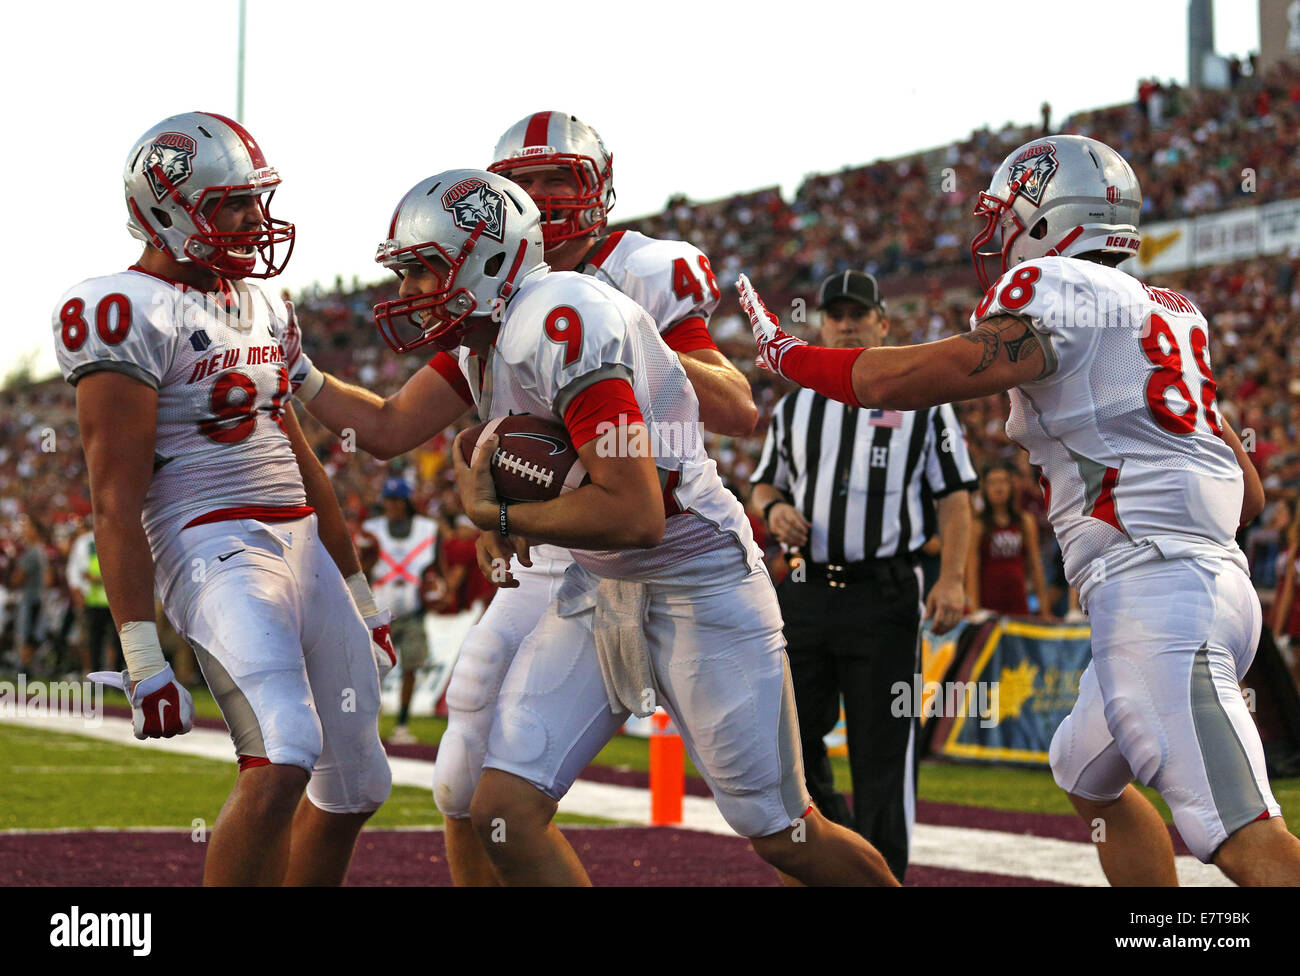 Las Cruces, NM, USA. 20th Sep, 2014. New Mexico holder Quinton McCown (9) is congratulated by teammates Reece White (80), Nick Lehman (88) and Chris Edling after scoring a touchdown on a fake field goal attempt during the football game against New Mexico State at the Aggie Memorial Stadium in Las Cruces, Saturday, Sept. 20, 2014. The Lobos won 38-35. © Andres Leighton/Albuquerque Journal/ZUMA Wire/Alamy Live News Stock Photo